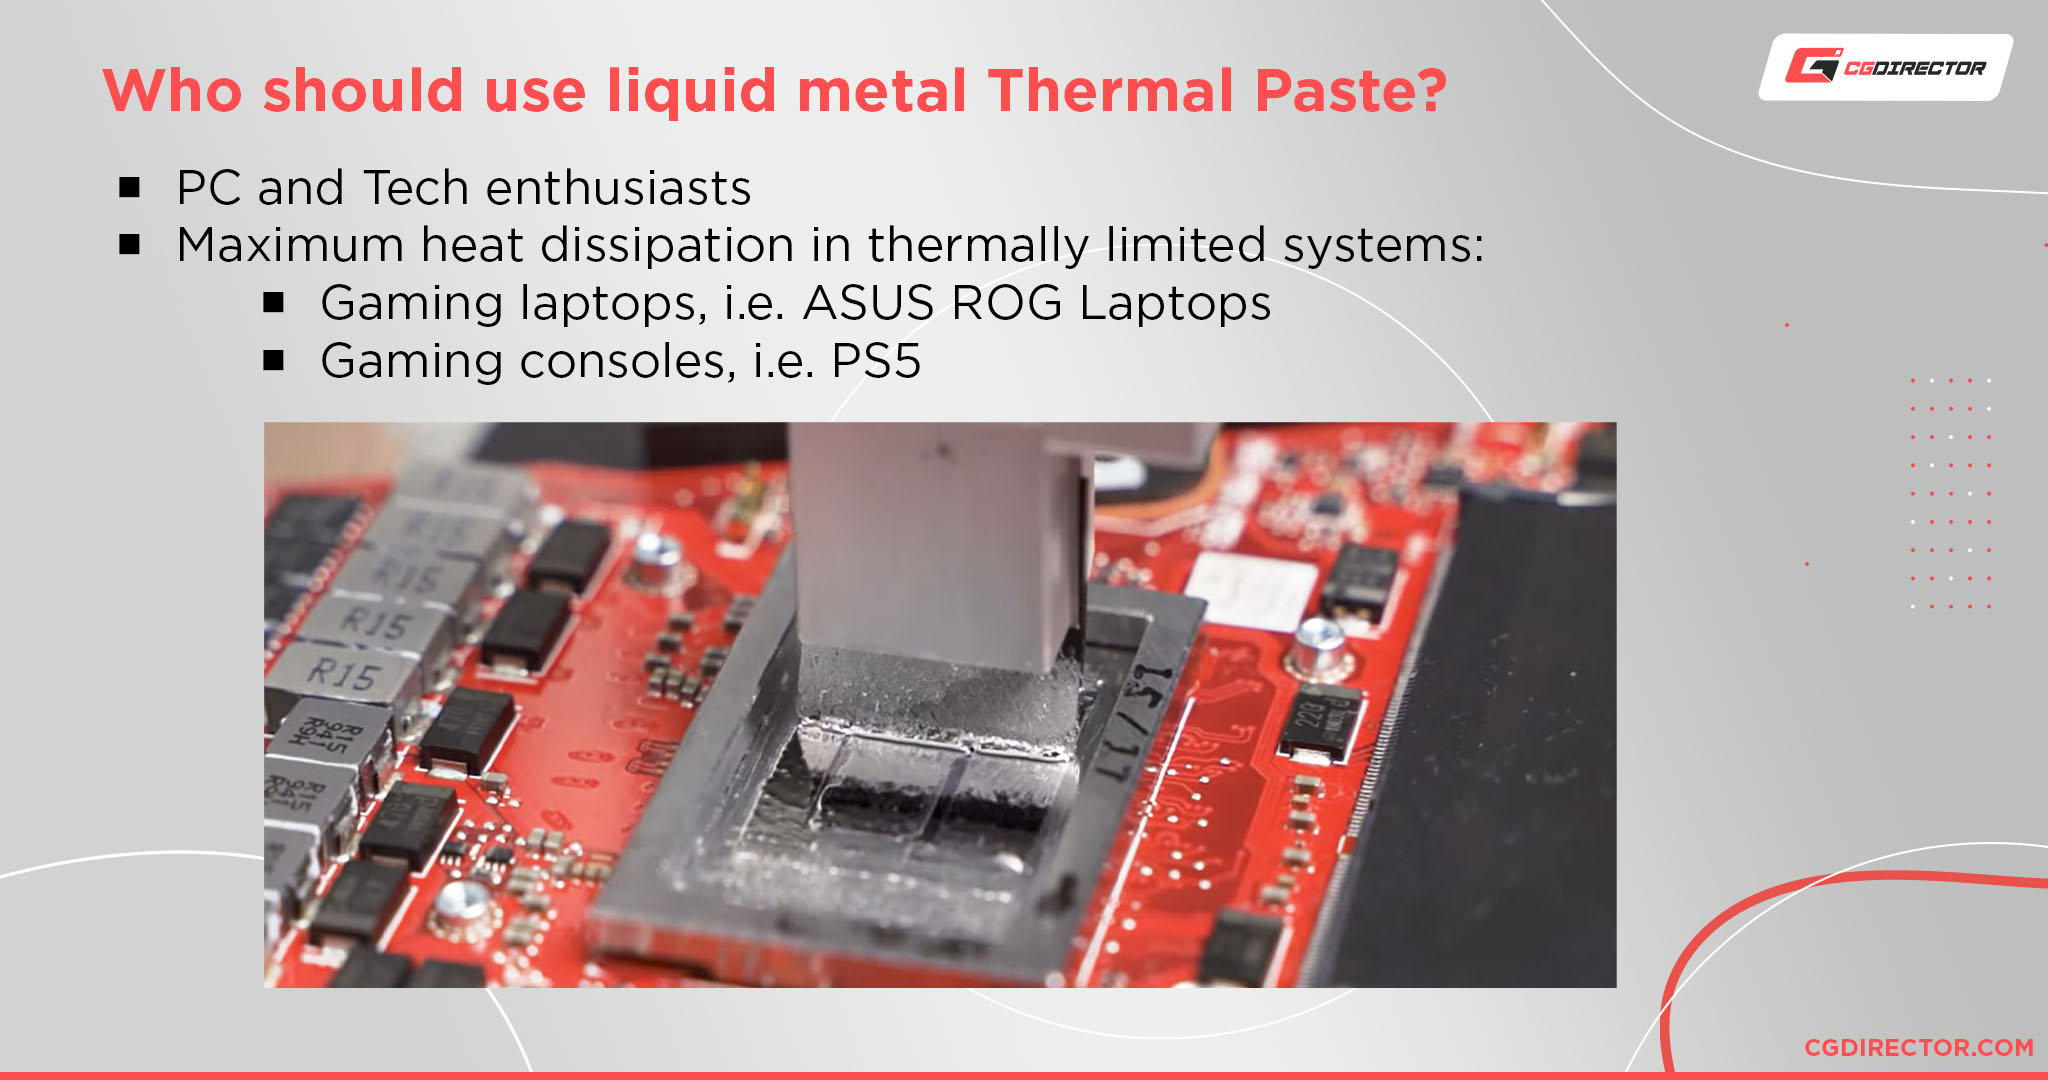 Who should use liquid metal Thermal Paste